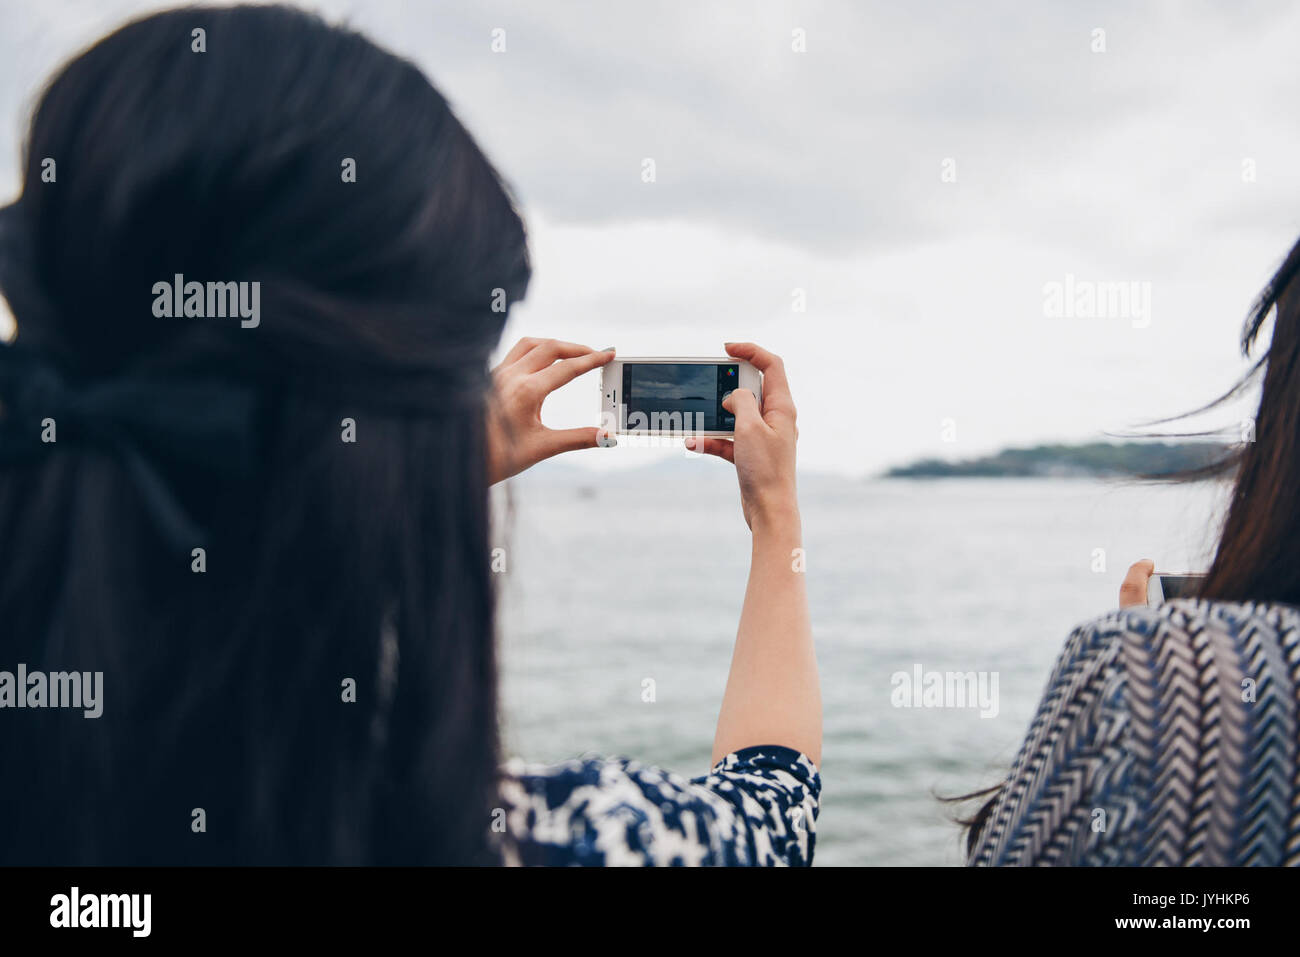 A woman taking a picture with her smartphone Stock Photo